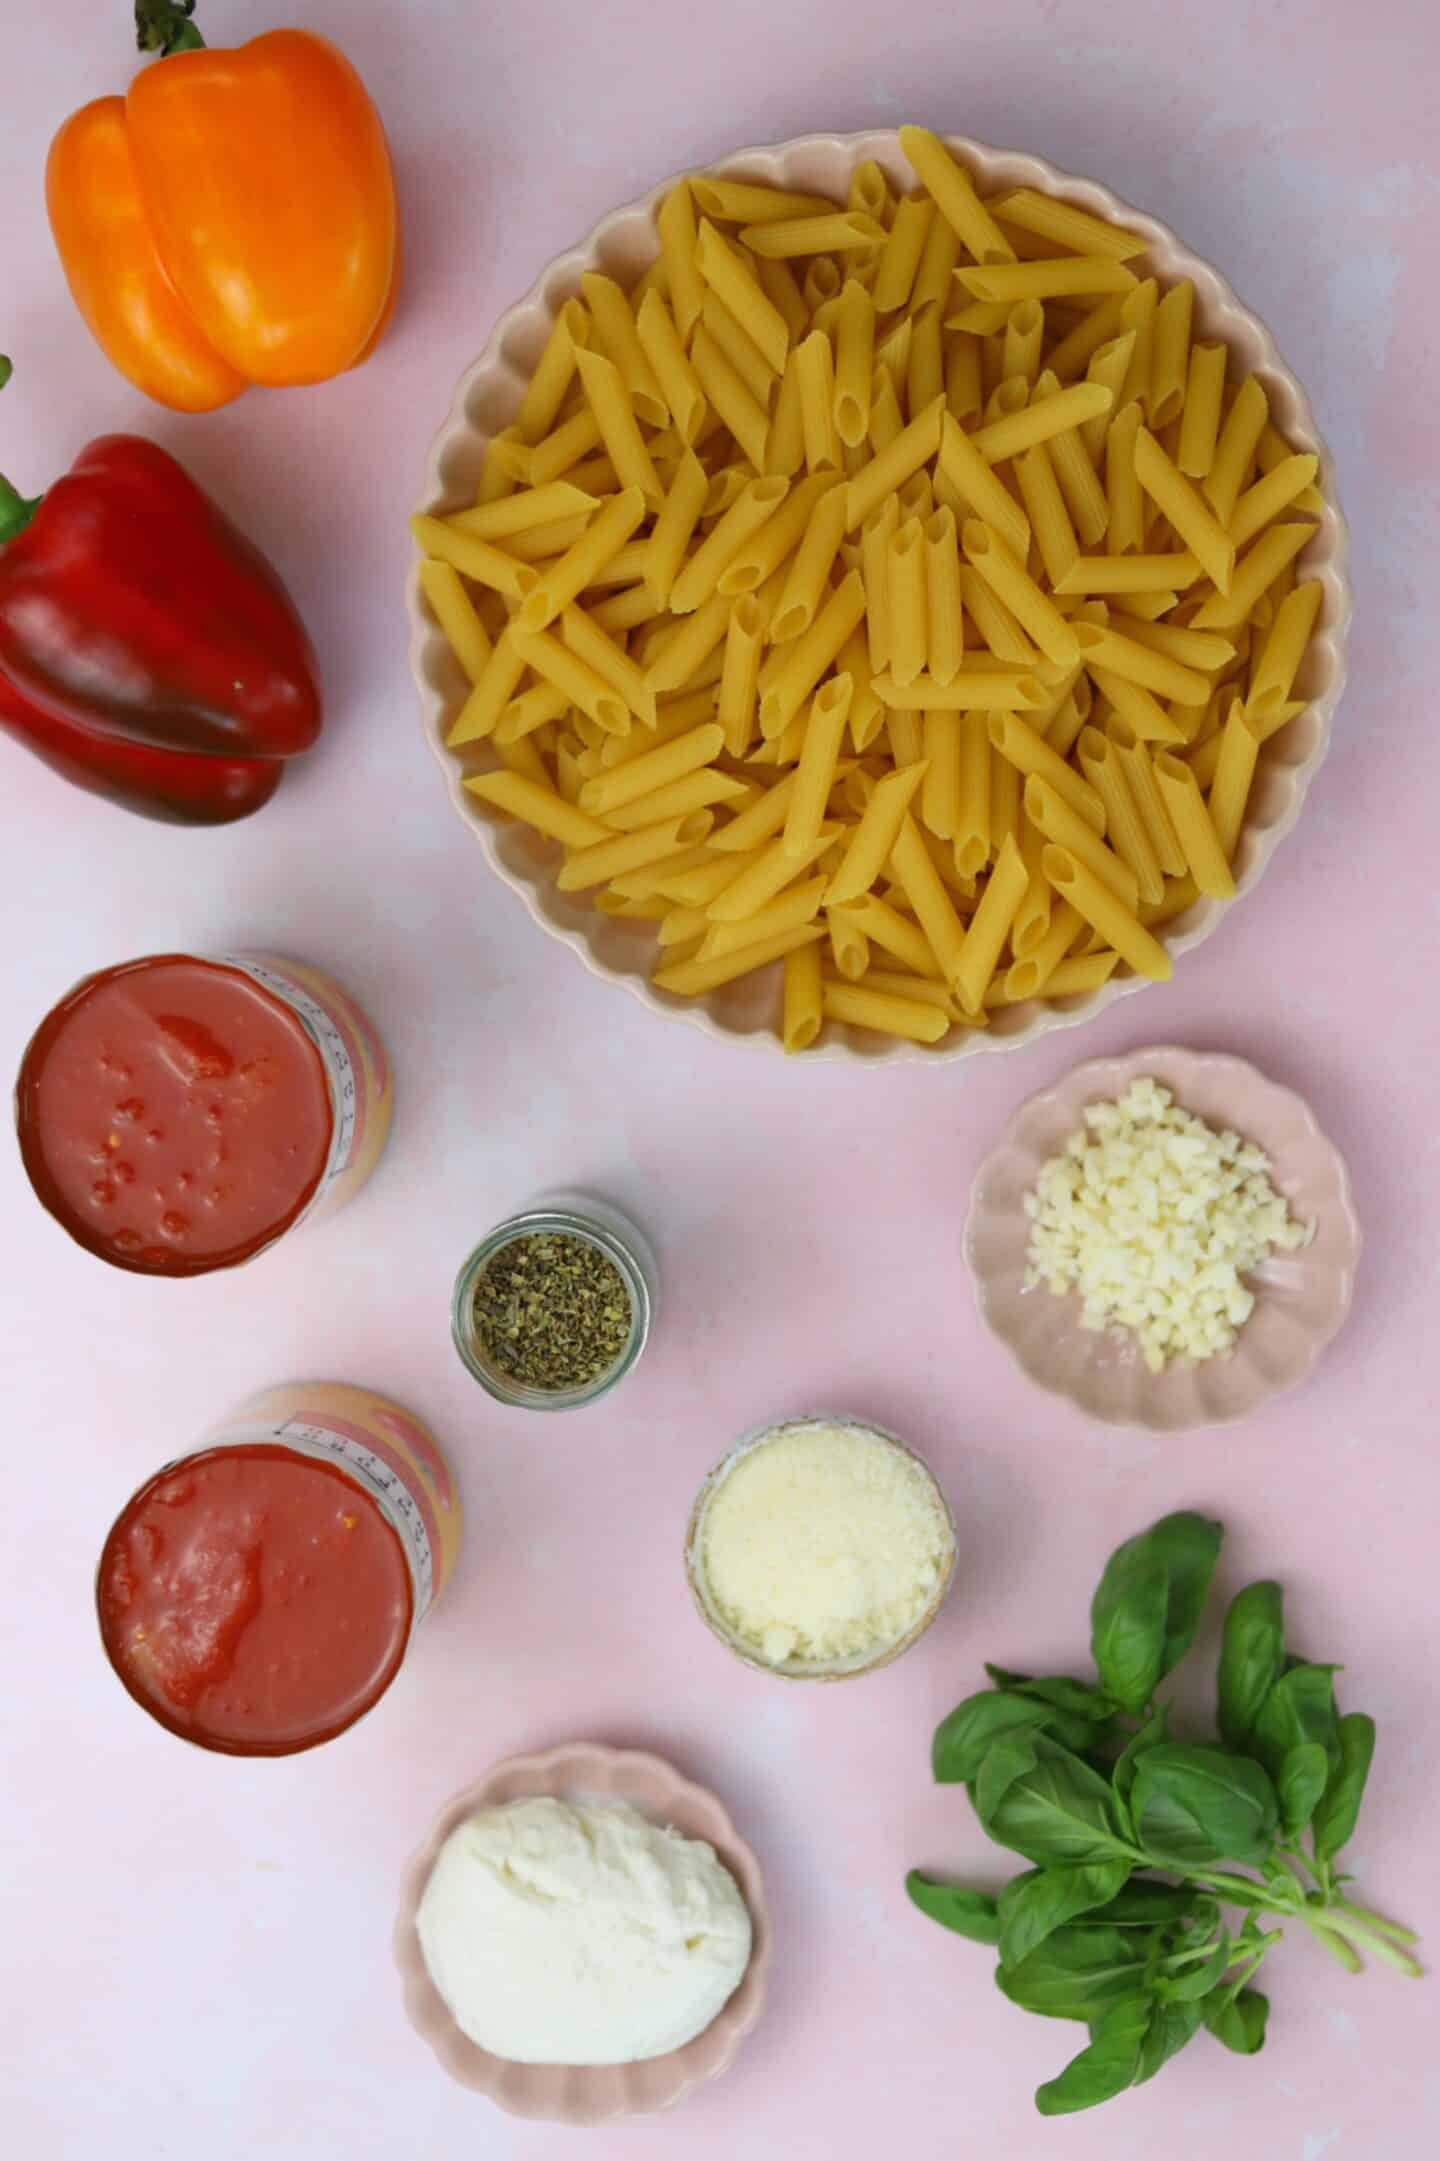 gluten free pasta bake recipe ingredients pasta peppers tomatoes basil and cheese